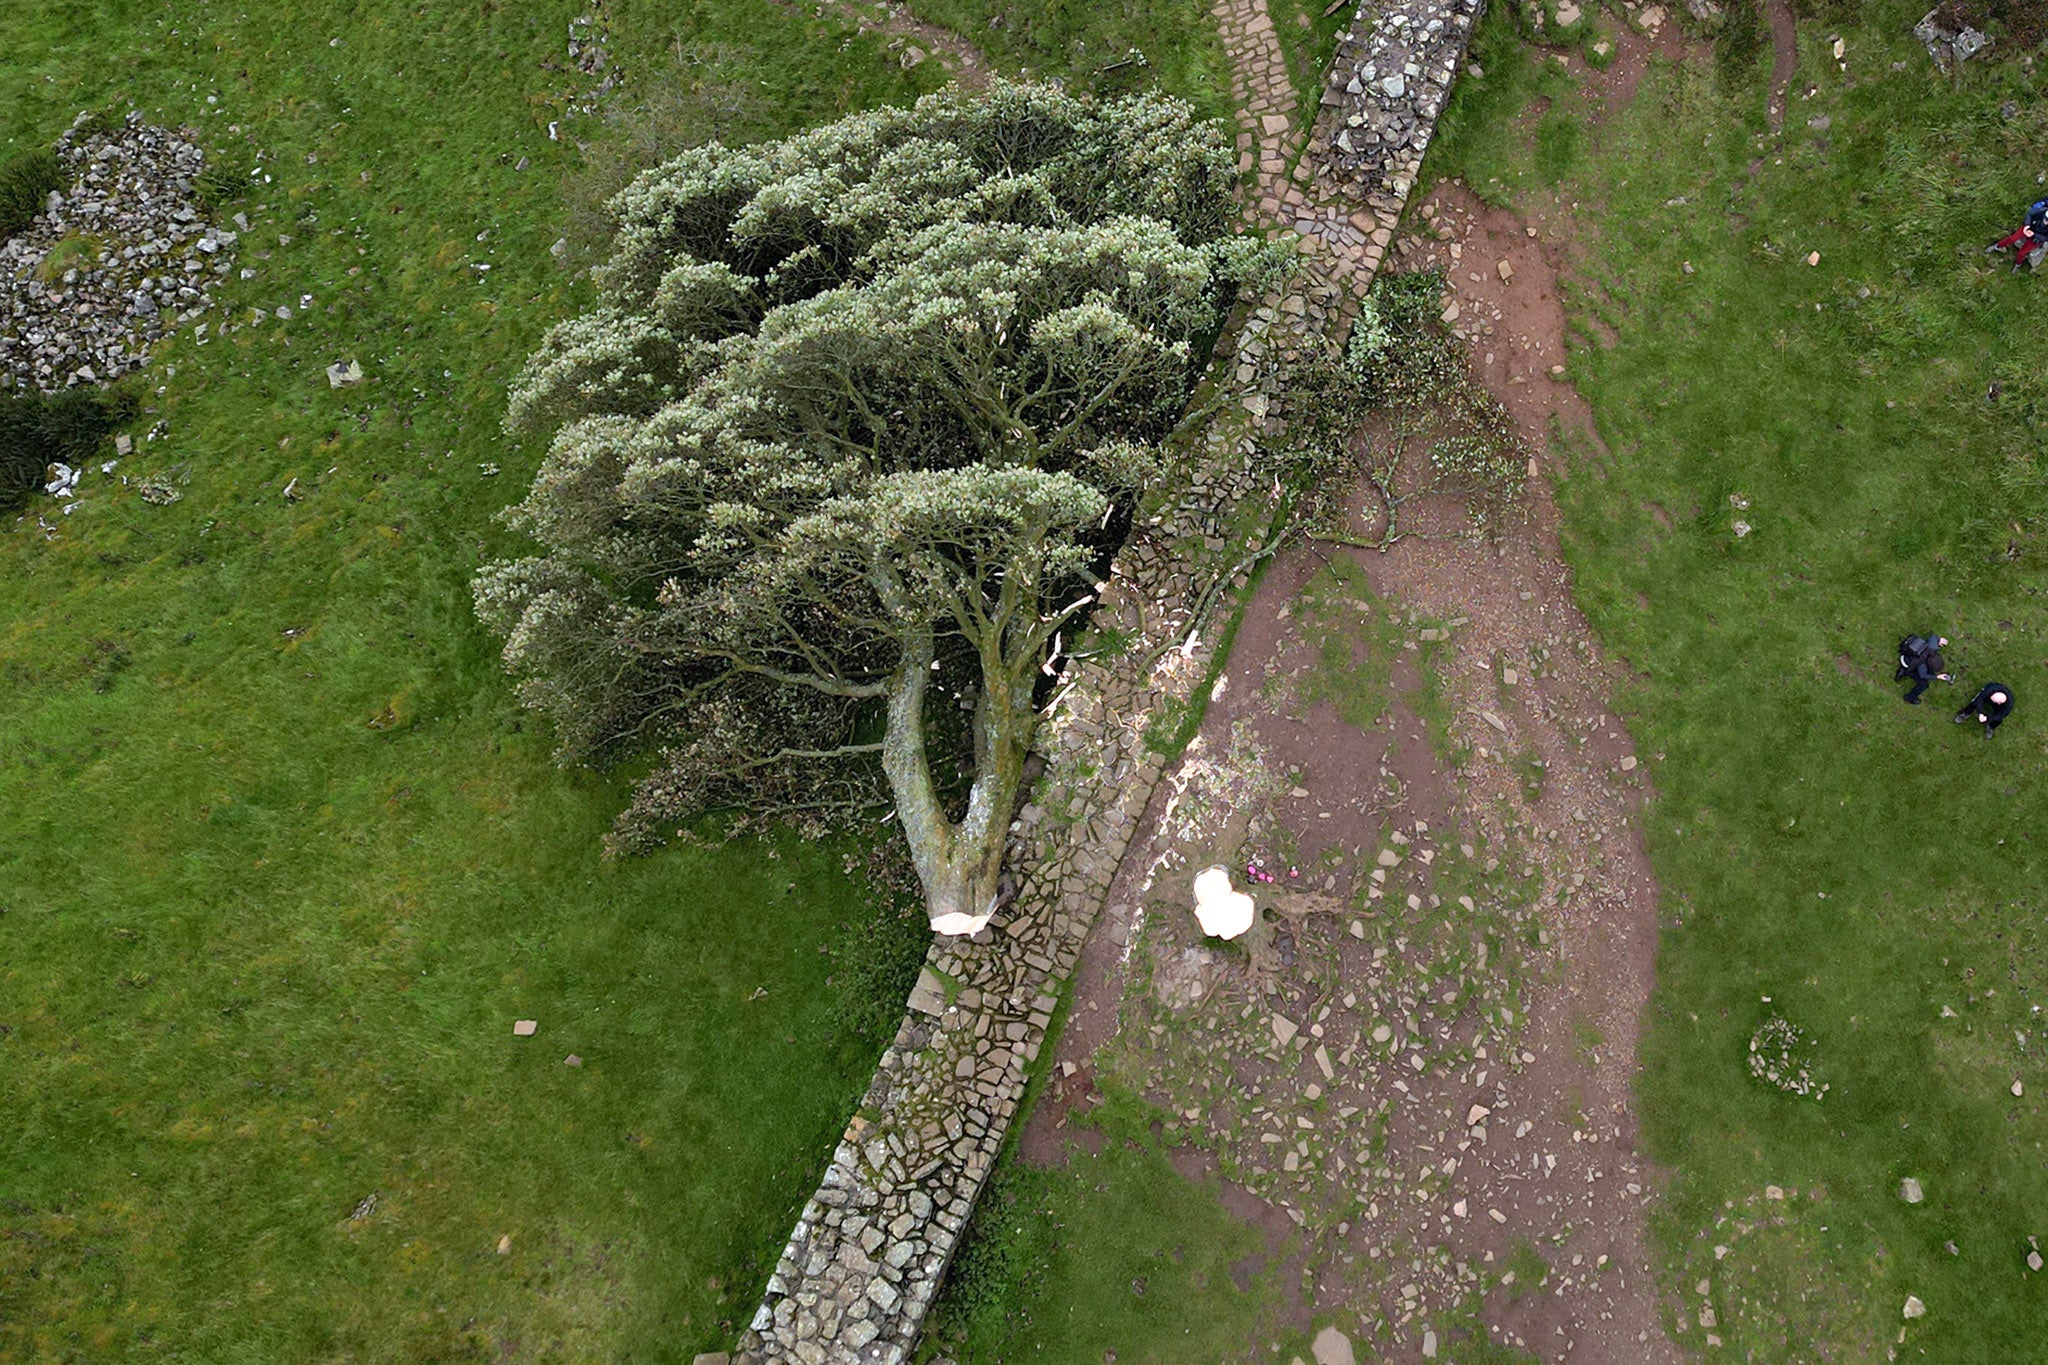 Hadrian’s Wall has been damaged by the vandals who chopped down the Sycamore Gap tree, investigators have discovered